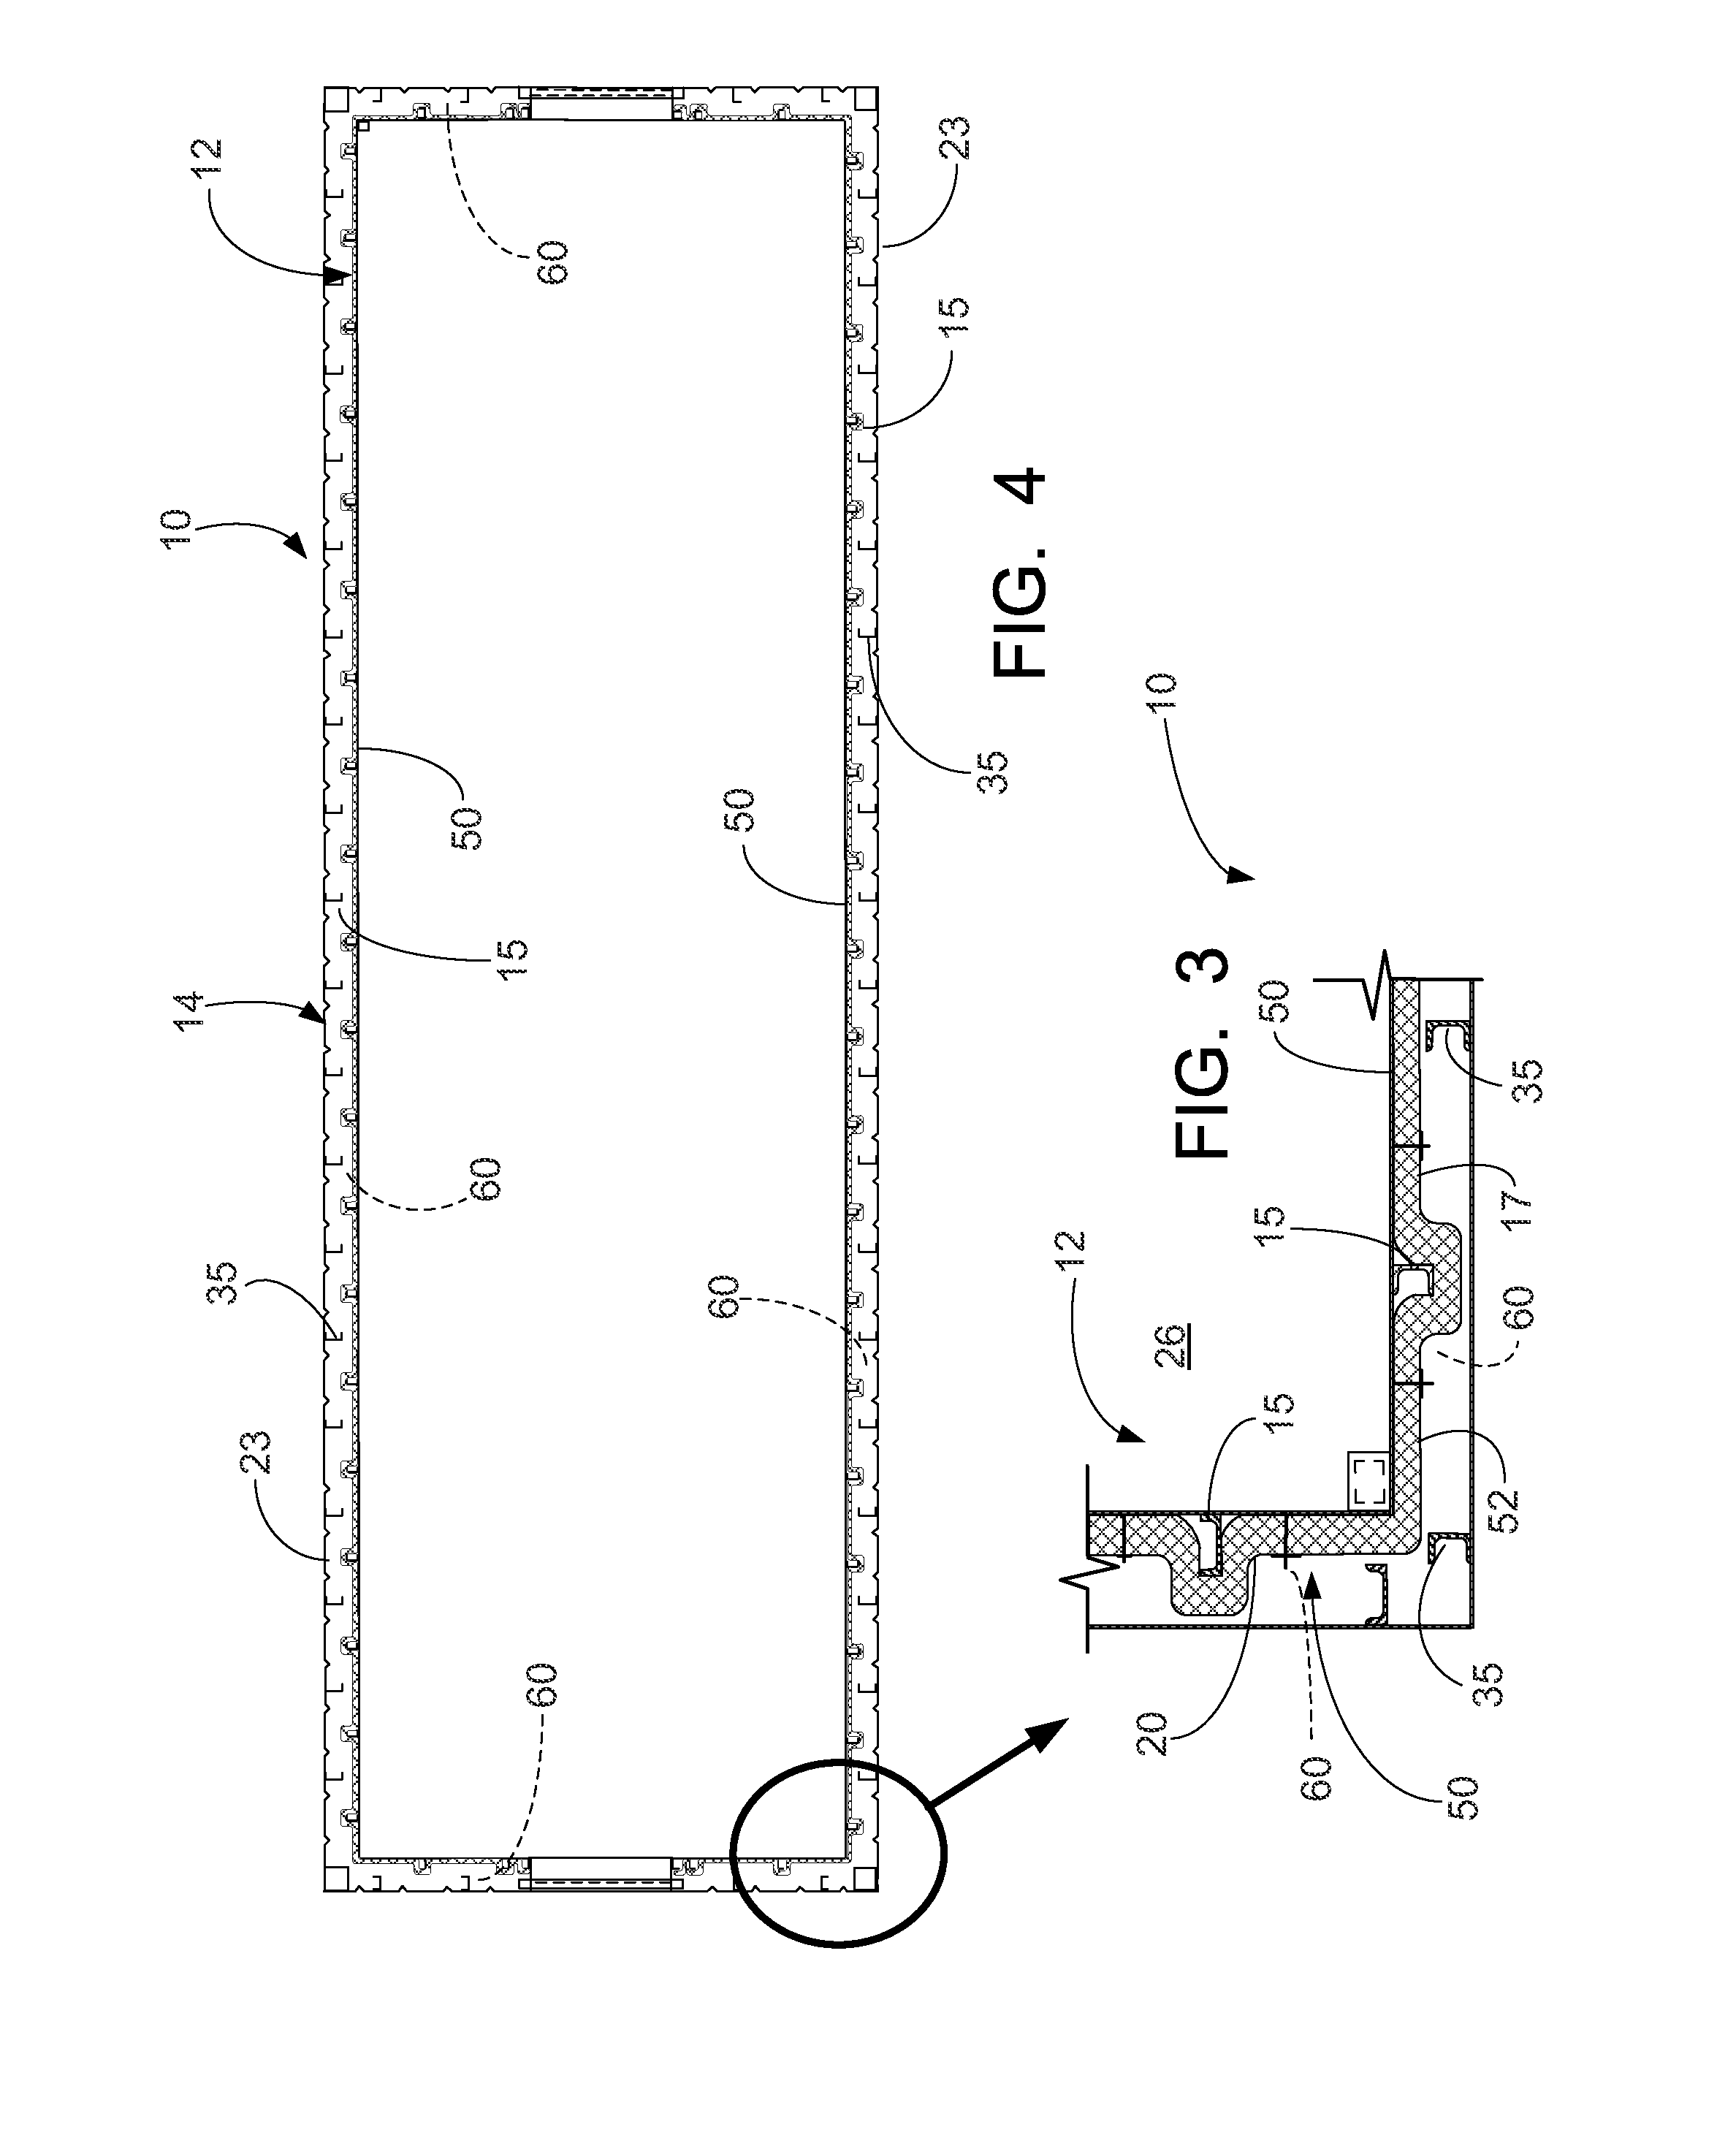 Aluminum accommodations module and method of constructing same